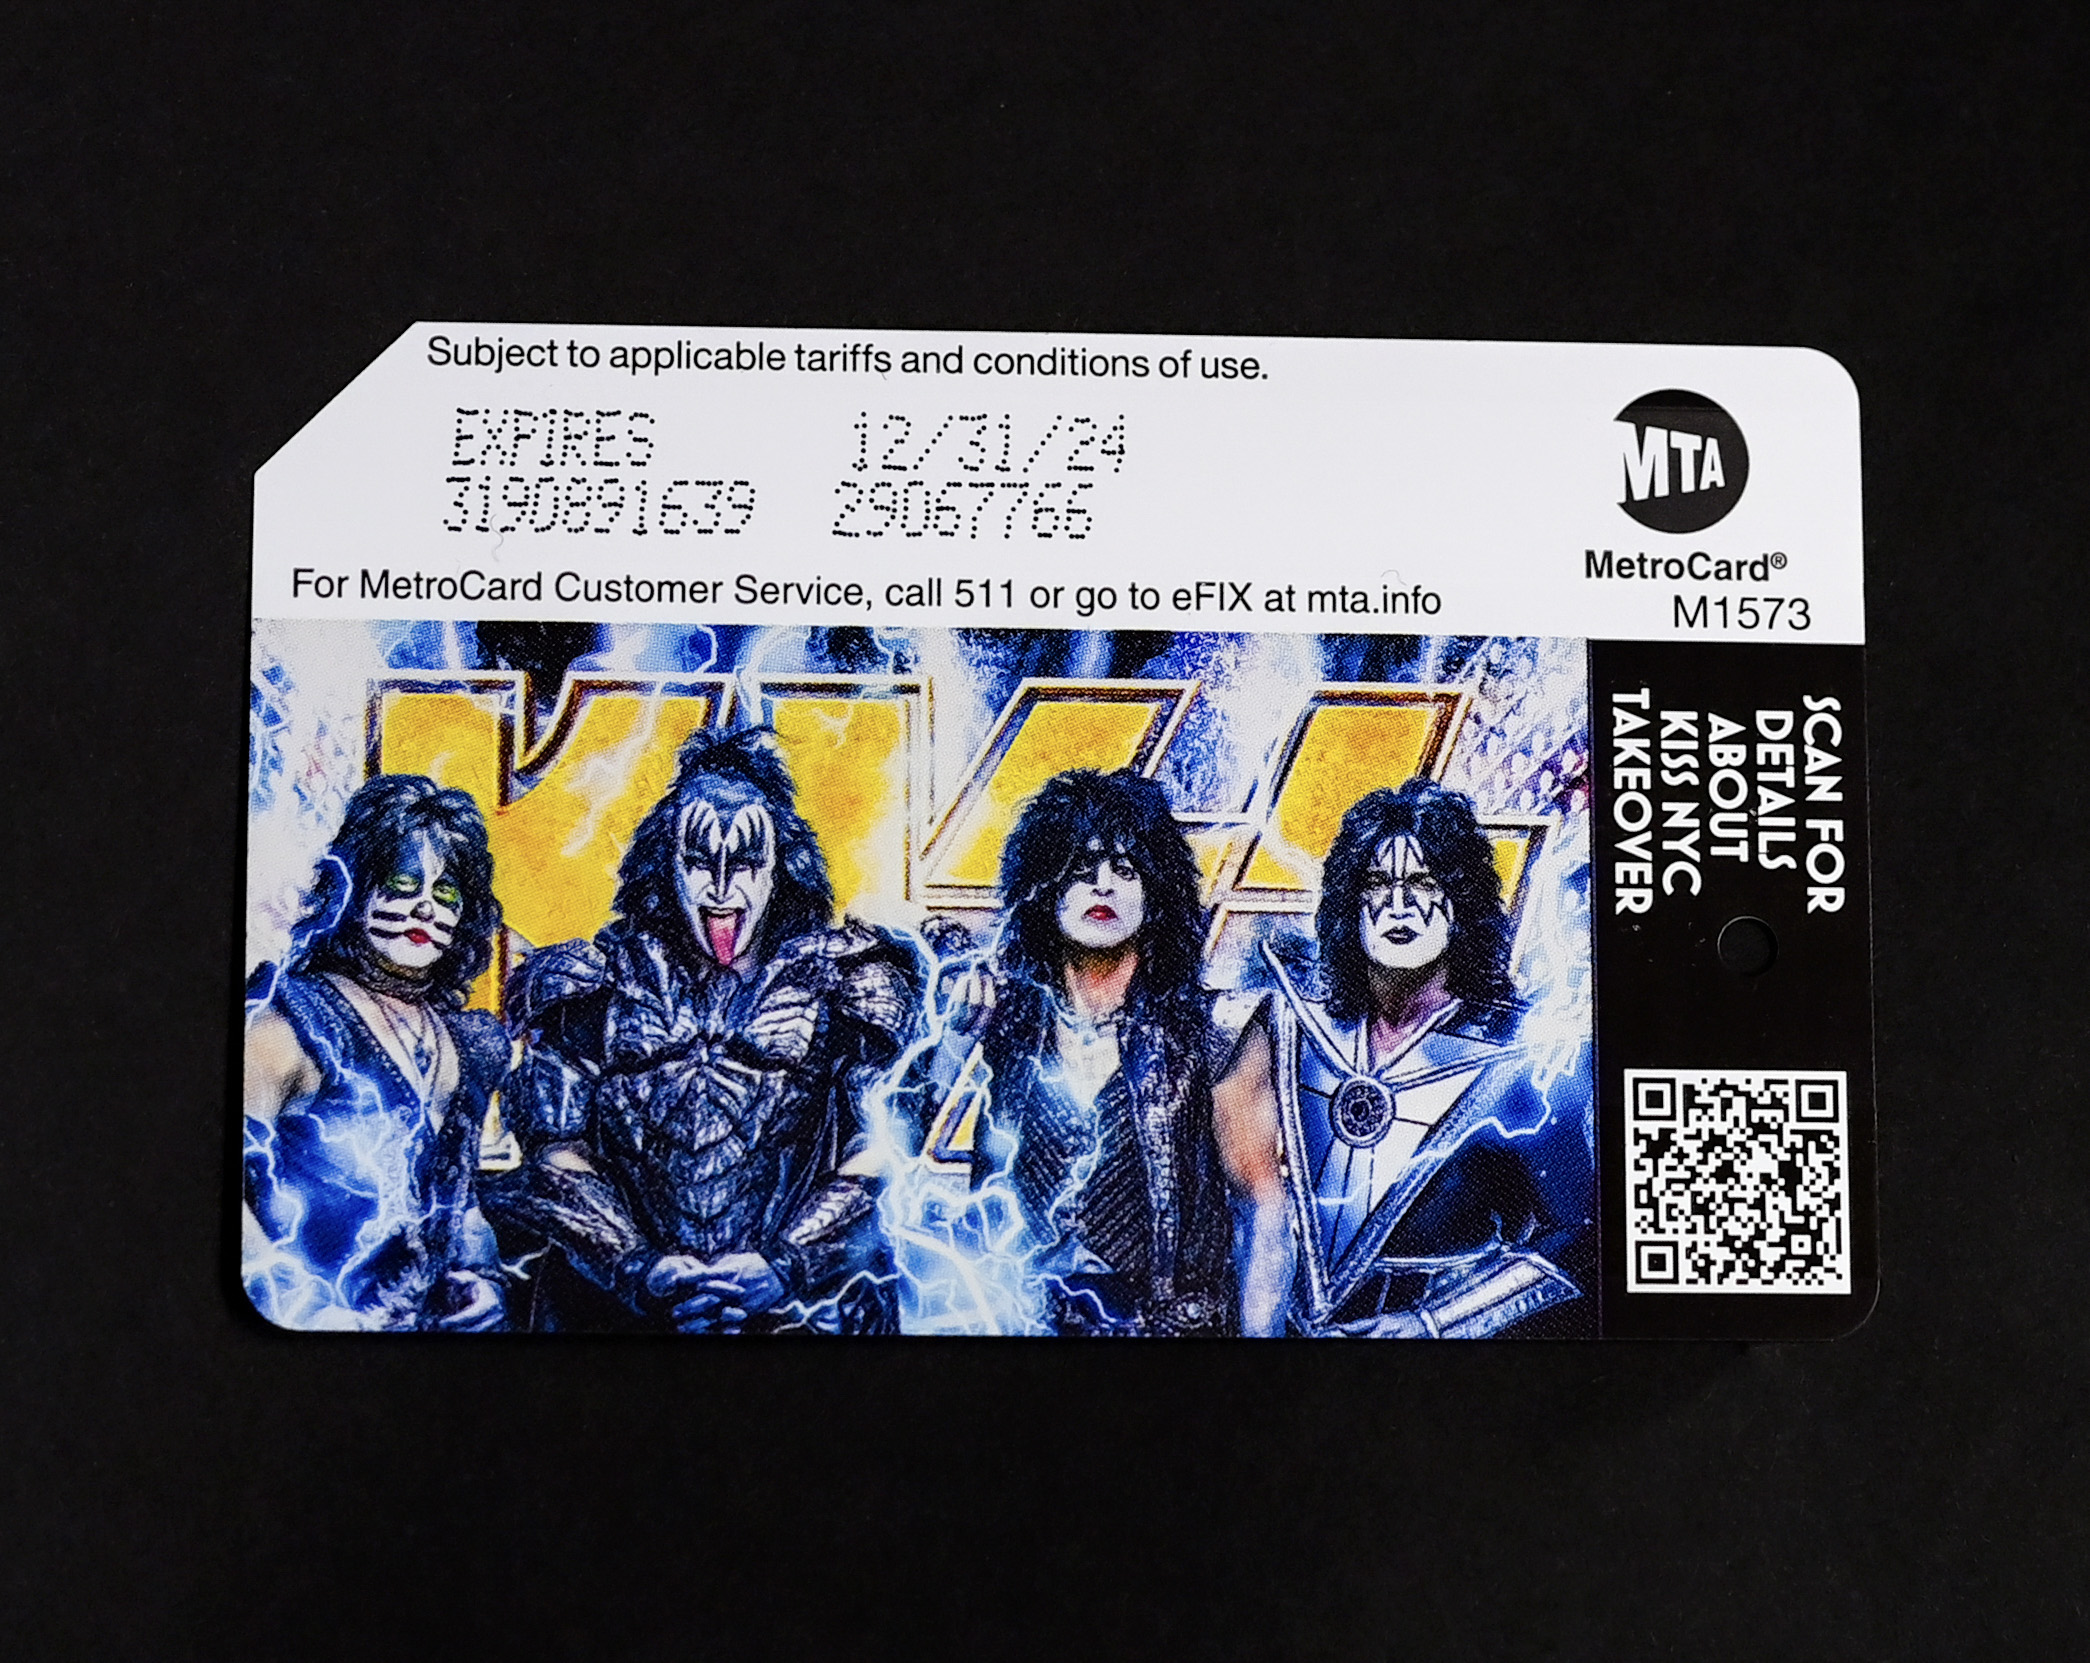 PHOTOS: MTA to Commemorate Final Madison Square Garden Concert of Legendary Rock Band KISS with MetroCards on November 27 